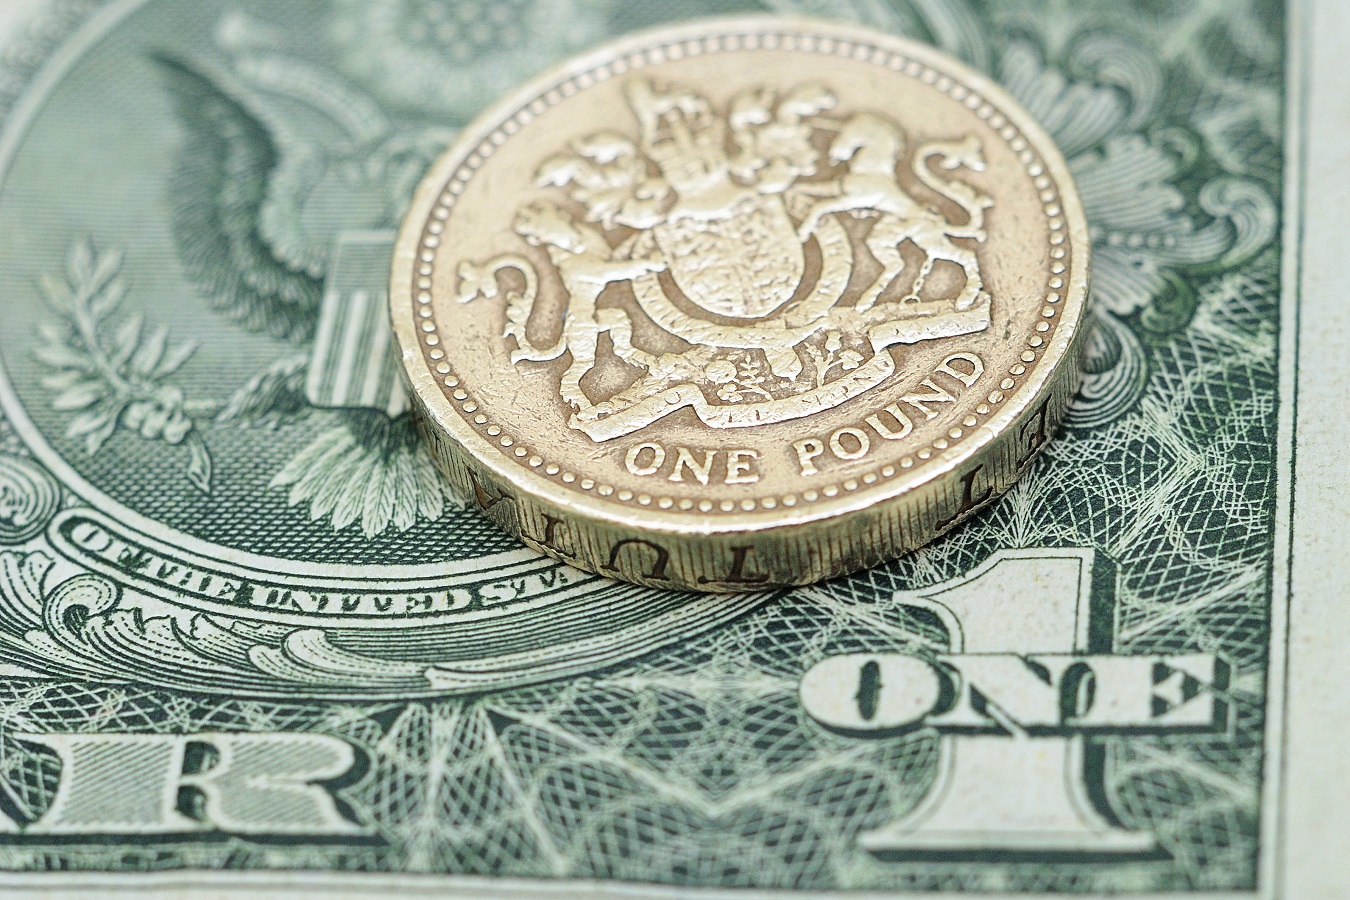 GBP holds value while the USD plumbs amid Fresh Brexit Vote